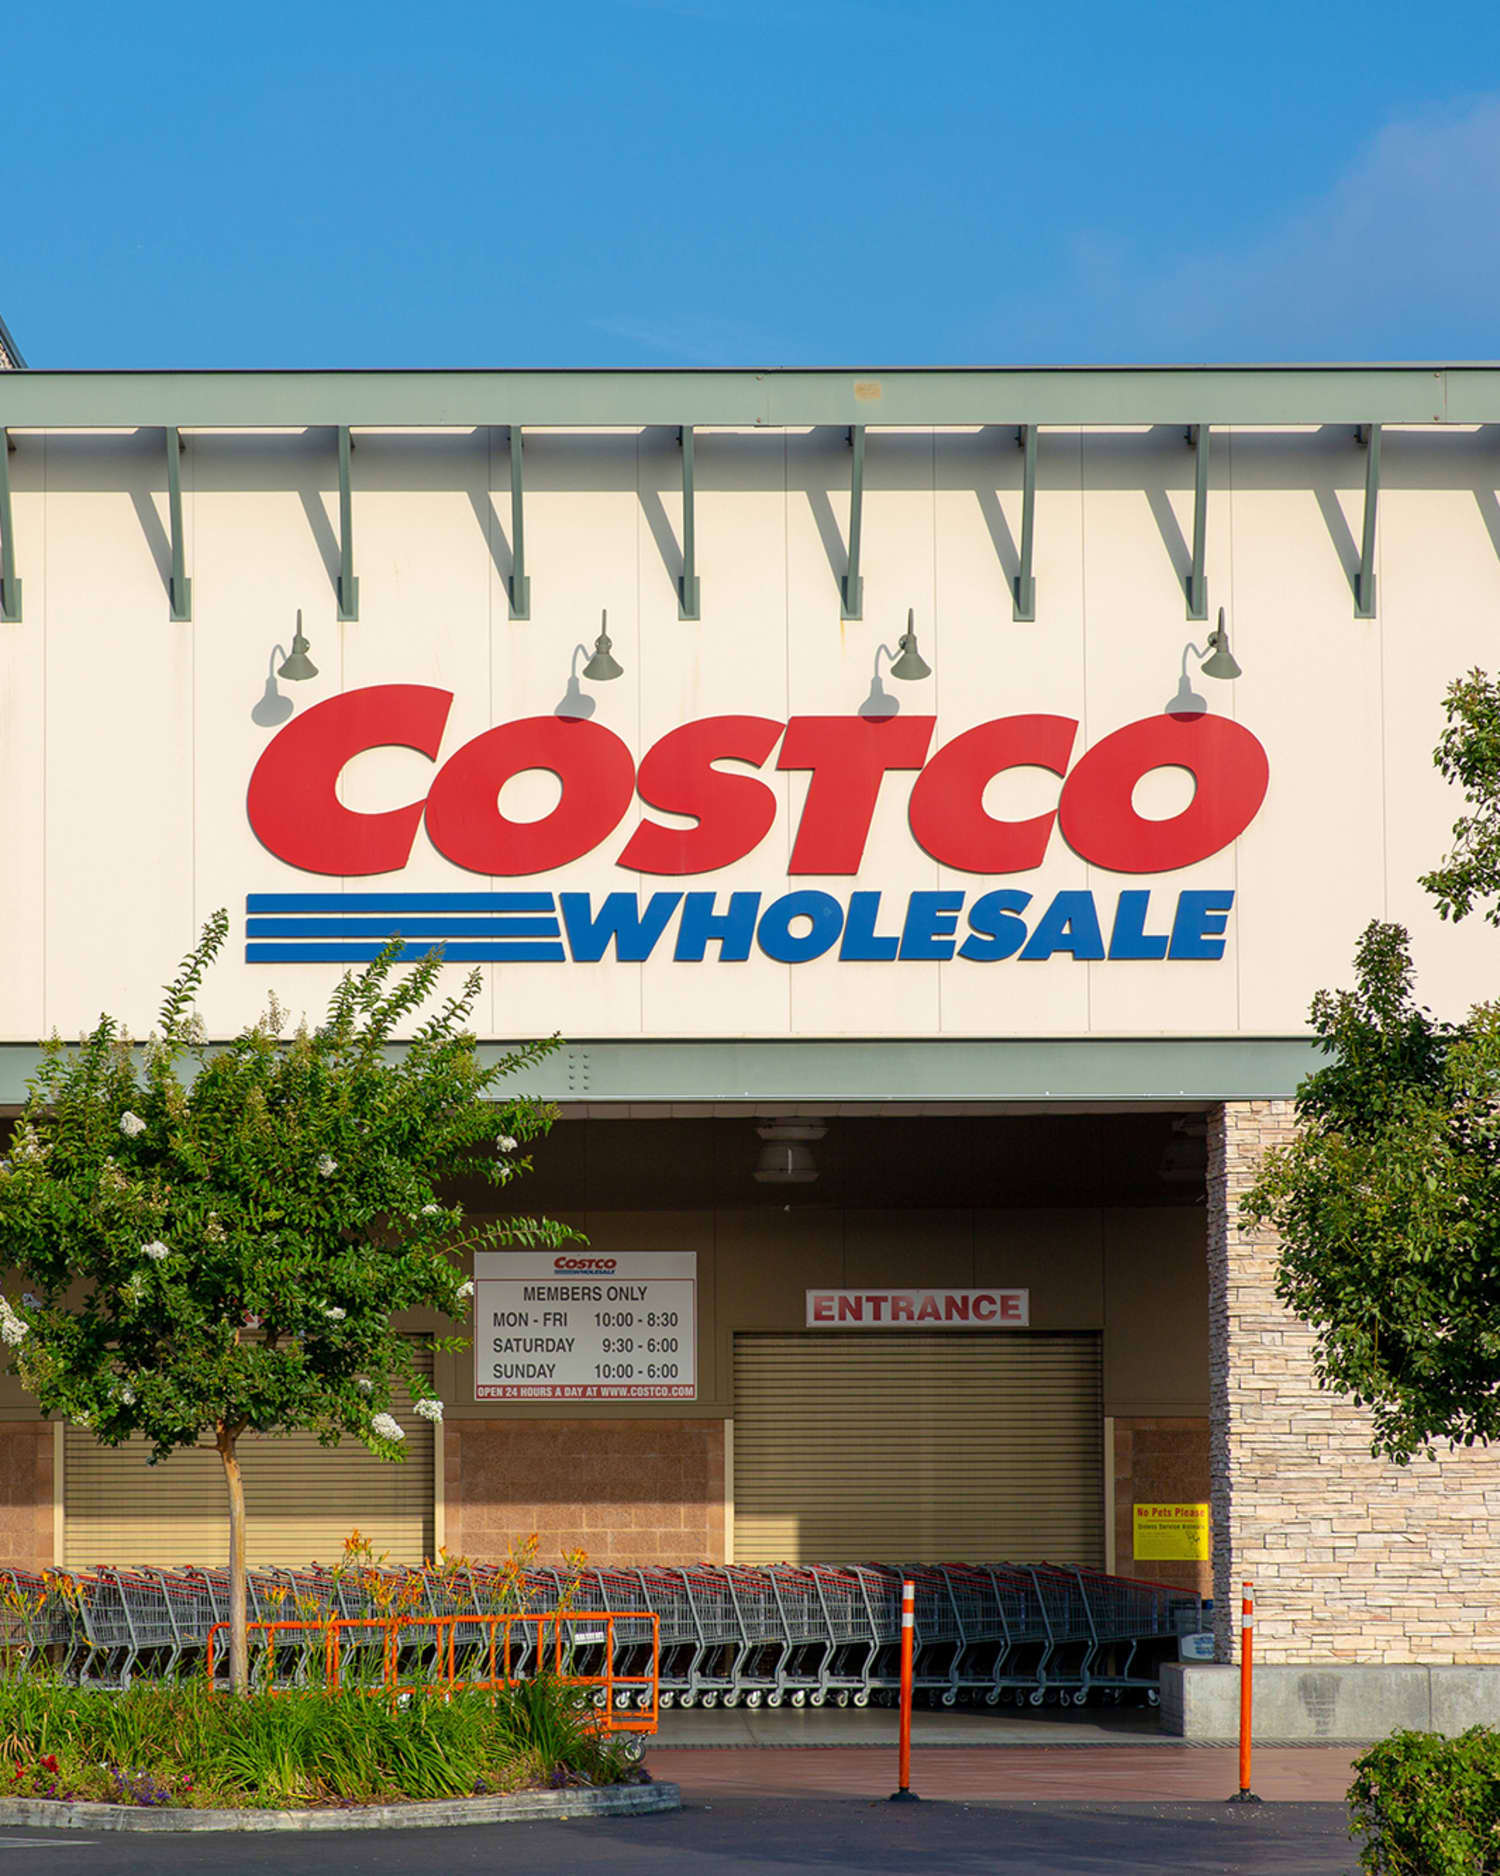 Costco Locations May Look a Bit Different Soon, Starting with This One in L.A.